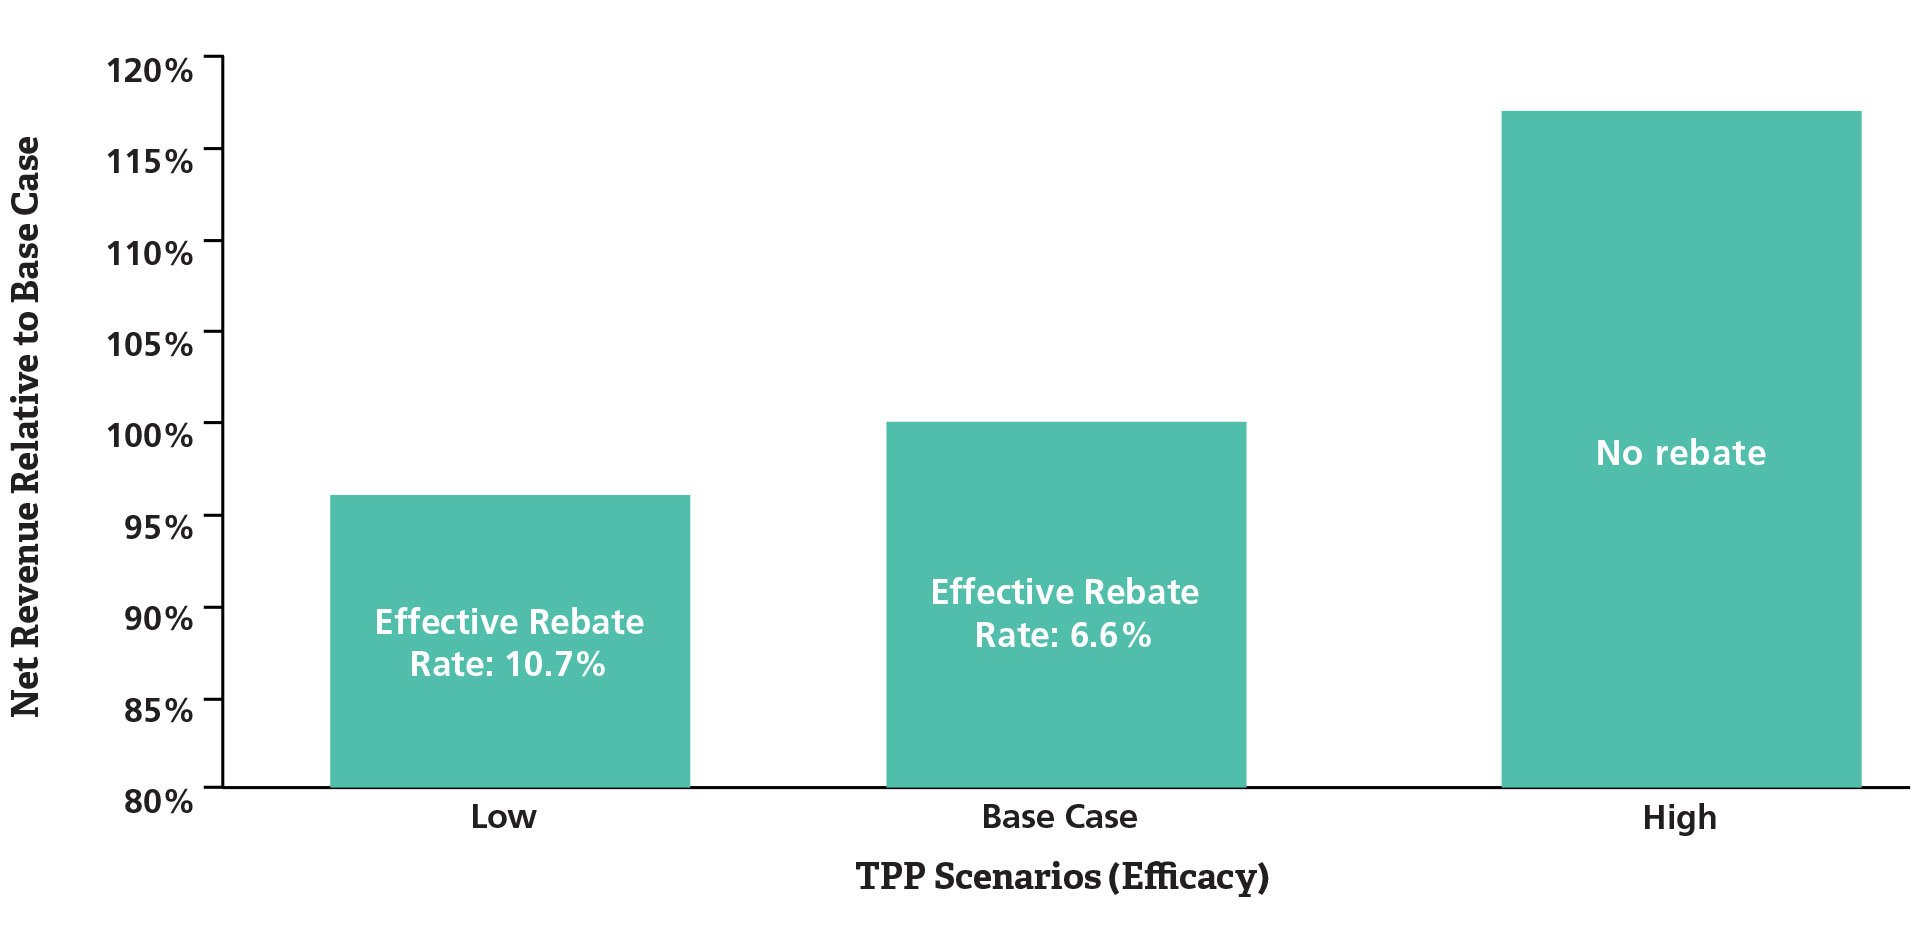 Figure 2. Potential Net Revenue Impact of Risk Sharing under Varying Clinical TPP Scenarios